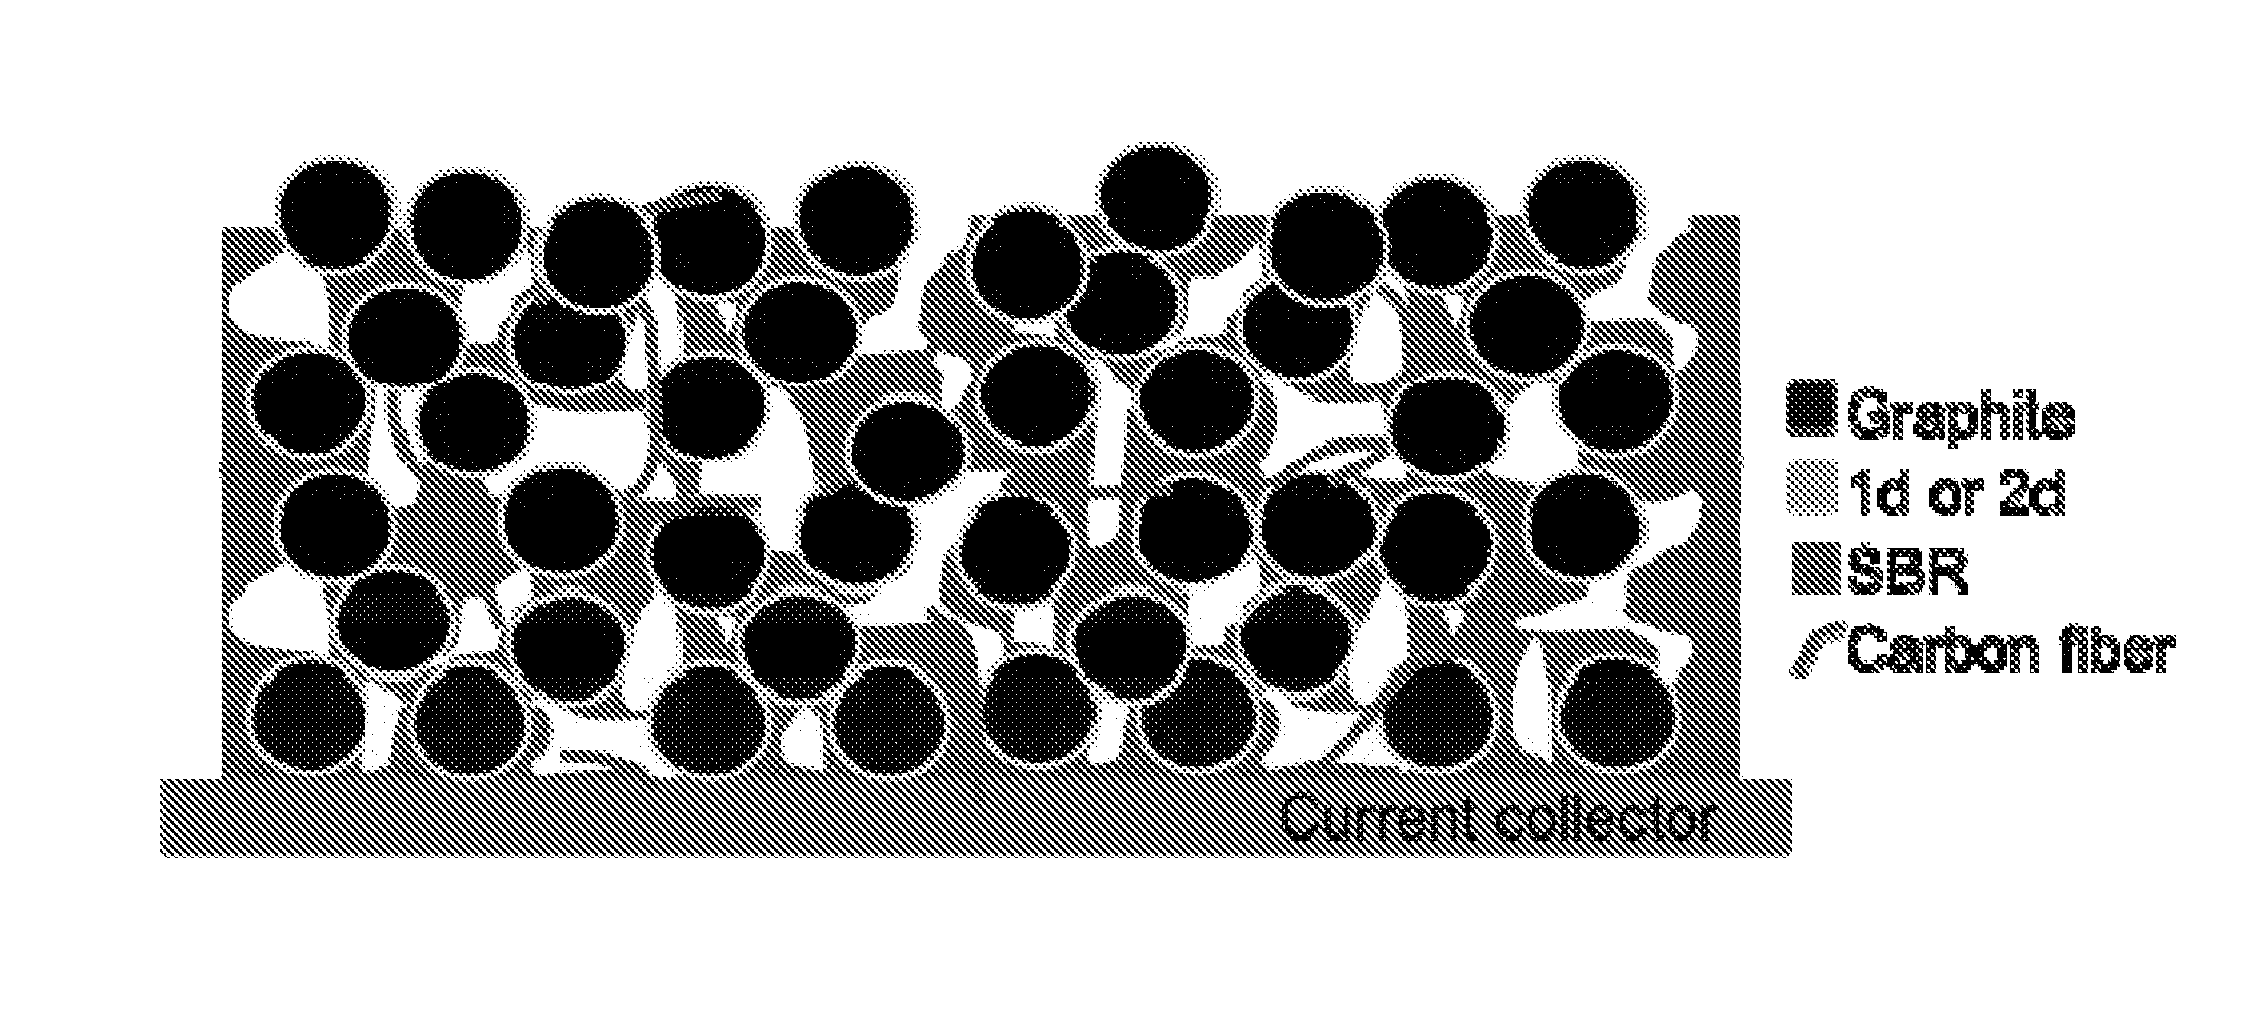 Lithium metal doped electrodes for lithium-ion rechargeable chemistry